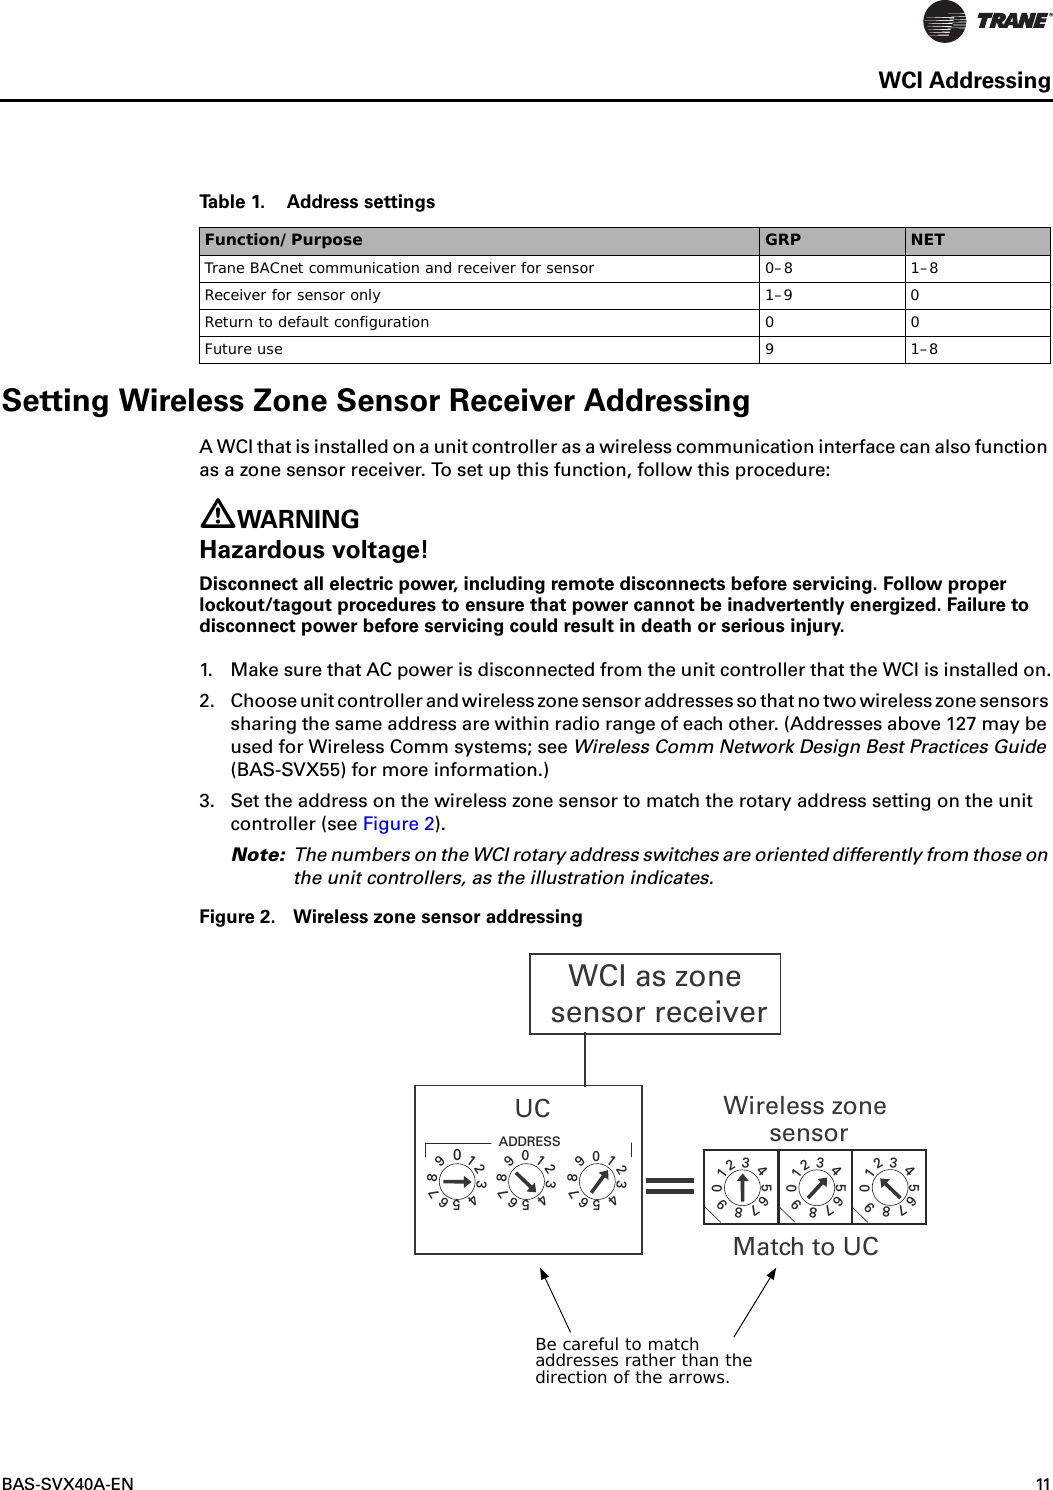 BAS-SVX40A-EN 11WCI AddressingSetting Wireless Zone Sensor Receiver AddressingA WCI that is installed on a unit controller as a wireless communication interface can also function as a zone sensor receiver. To set up this function, follow this procedure:WARNINGHazardous voltage!Disconnect all electric power, including remote disconnects before servicing. Follow proper lockout/tagout procedures to ensure that power cannot be inadvertently energized. Failure to disconnect power before servicing could result in death or serious injury.1. Make sure that AC power is disconnected from the unit controller that the WCI is installed on.2. Choose unit controller and wireless zone sensor addresses so that no two wireless zone sensors sharing the same address are within radio range of each other. (Addresses above 127 may be used for Wireless Comm systems; see Wireless Comm Network Design Best Practices Guide (BAS-SVX55) for more information.)3. Set the address on the wireless zone sensor to match the rotary address setting on the unit controller (see Figure 2).Note: The numbers on the WCI rotary address switches are oriented differently from those on the unit controllers, as the illustration indicates.Figure 2. Wireless zone sensor addressingTable 1. Address settingsFunction/Purpose GRP NETTrane BACnet communication and receiver for sensor 0–8 1–8Receiver for sensor only 1–9 0Return to default configuration 0 0Future use 91–8122345678901345671234567890890UC Wireless zonesensorMatch to UC12356789012345678901234567890ADDRESS4WCI as zone sensor receiverBe careful to match addresses rather than the direction of the arrows.